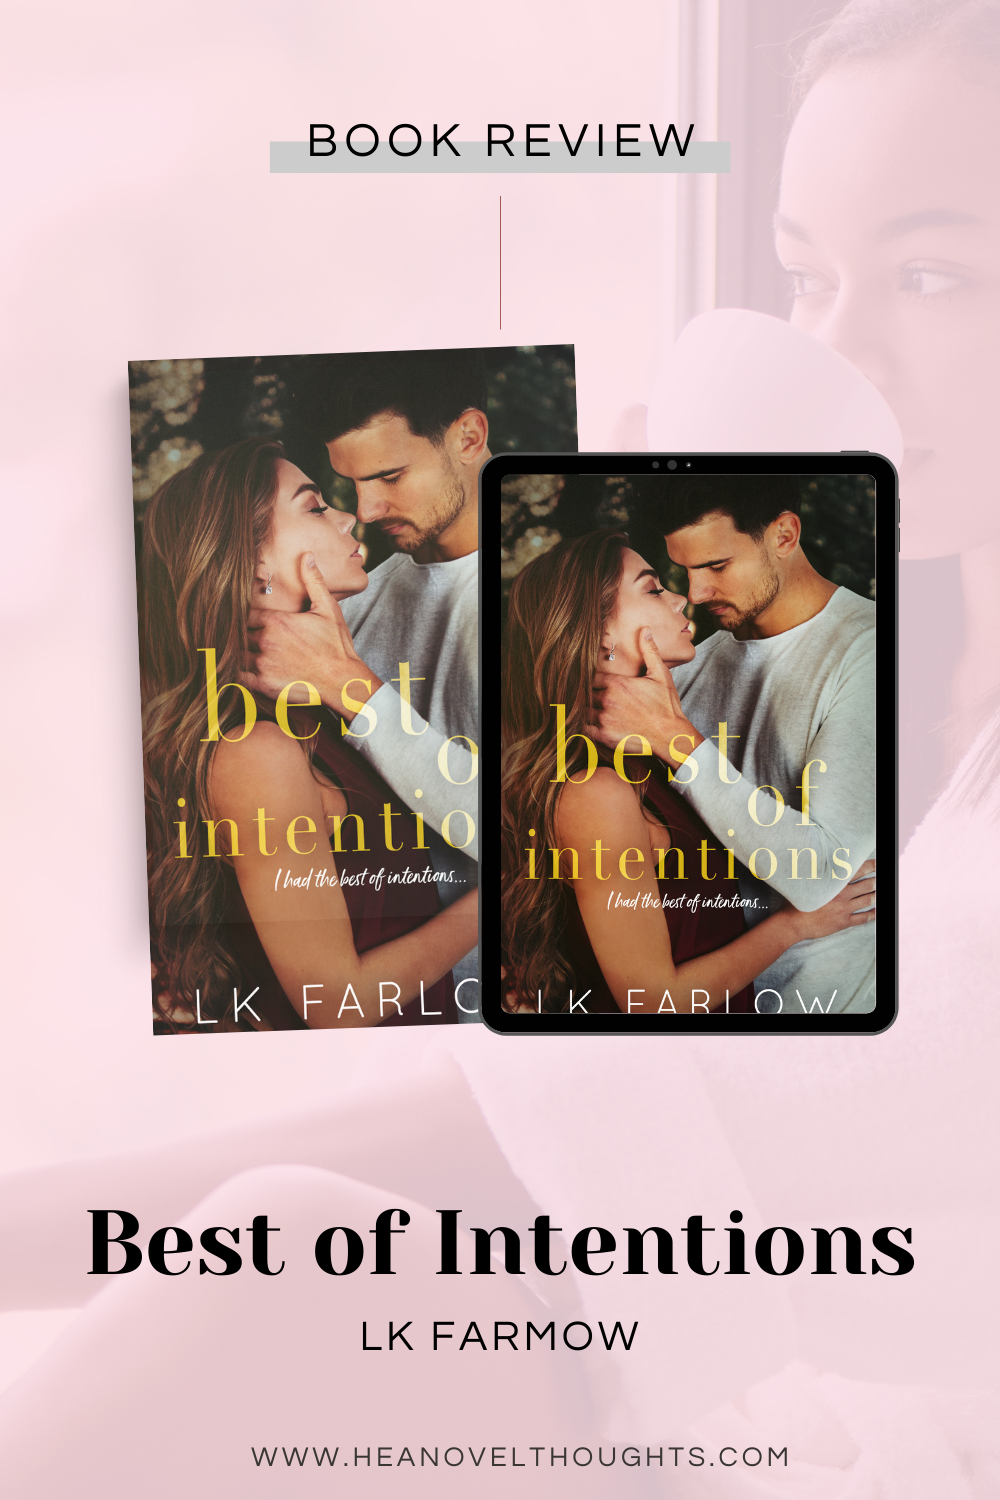 Best of Intentions by LK Farlow